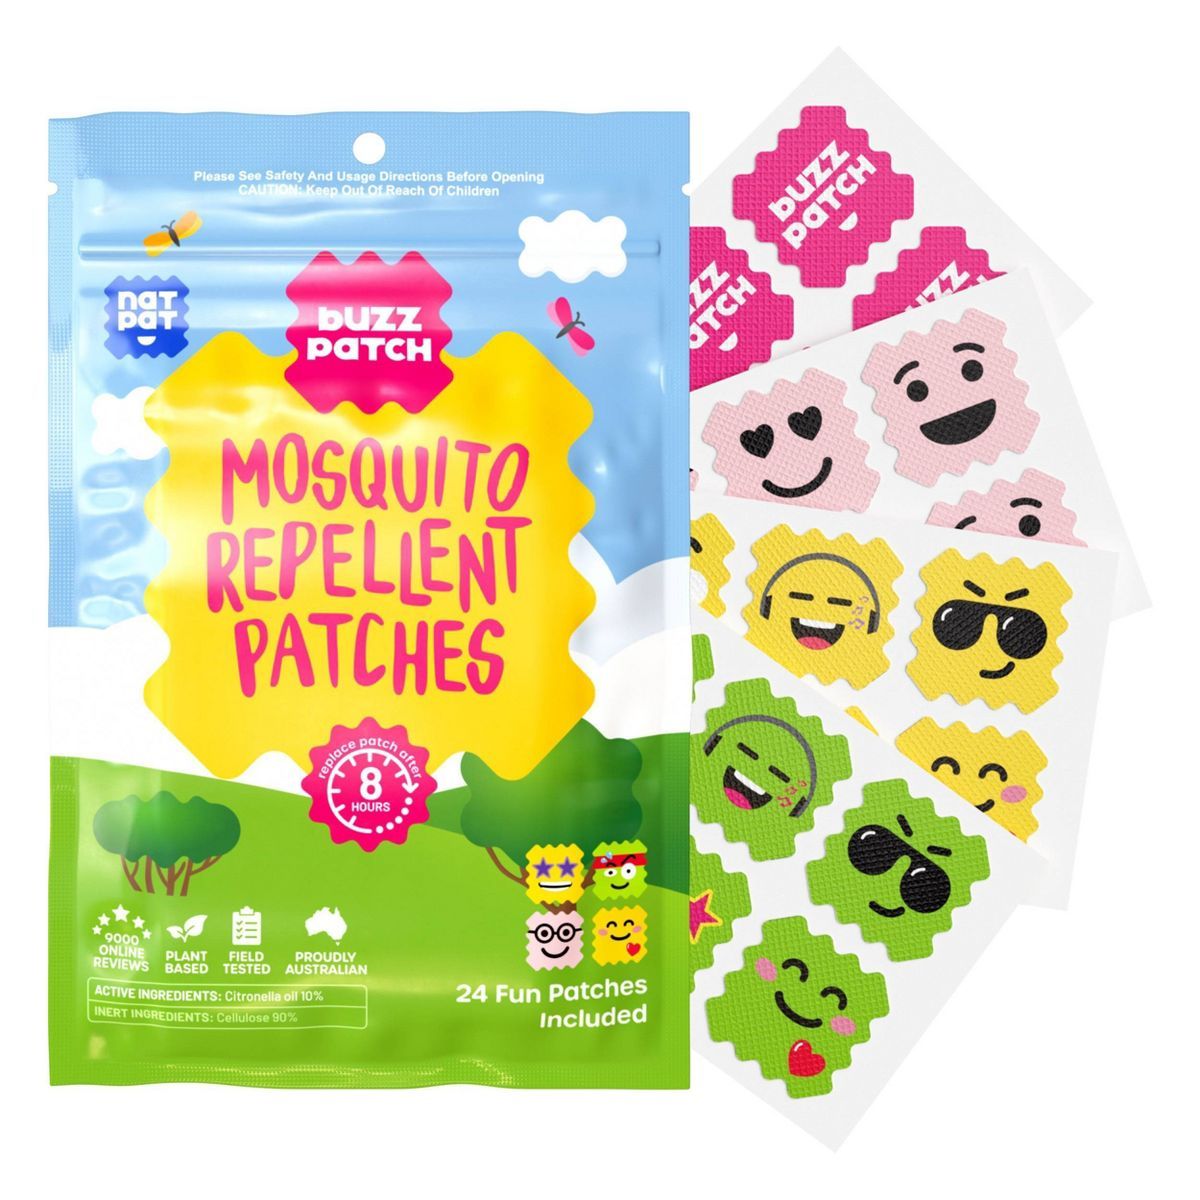 NATPAT 24ct Buzz Patch Mosquito Repellent Patches Personal Repellent | Target